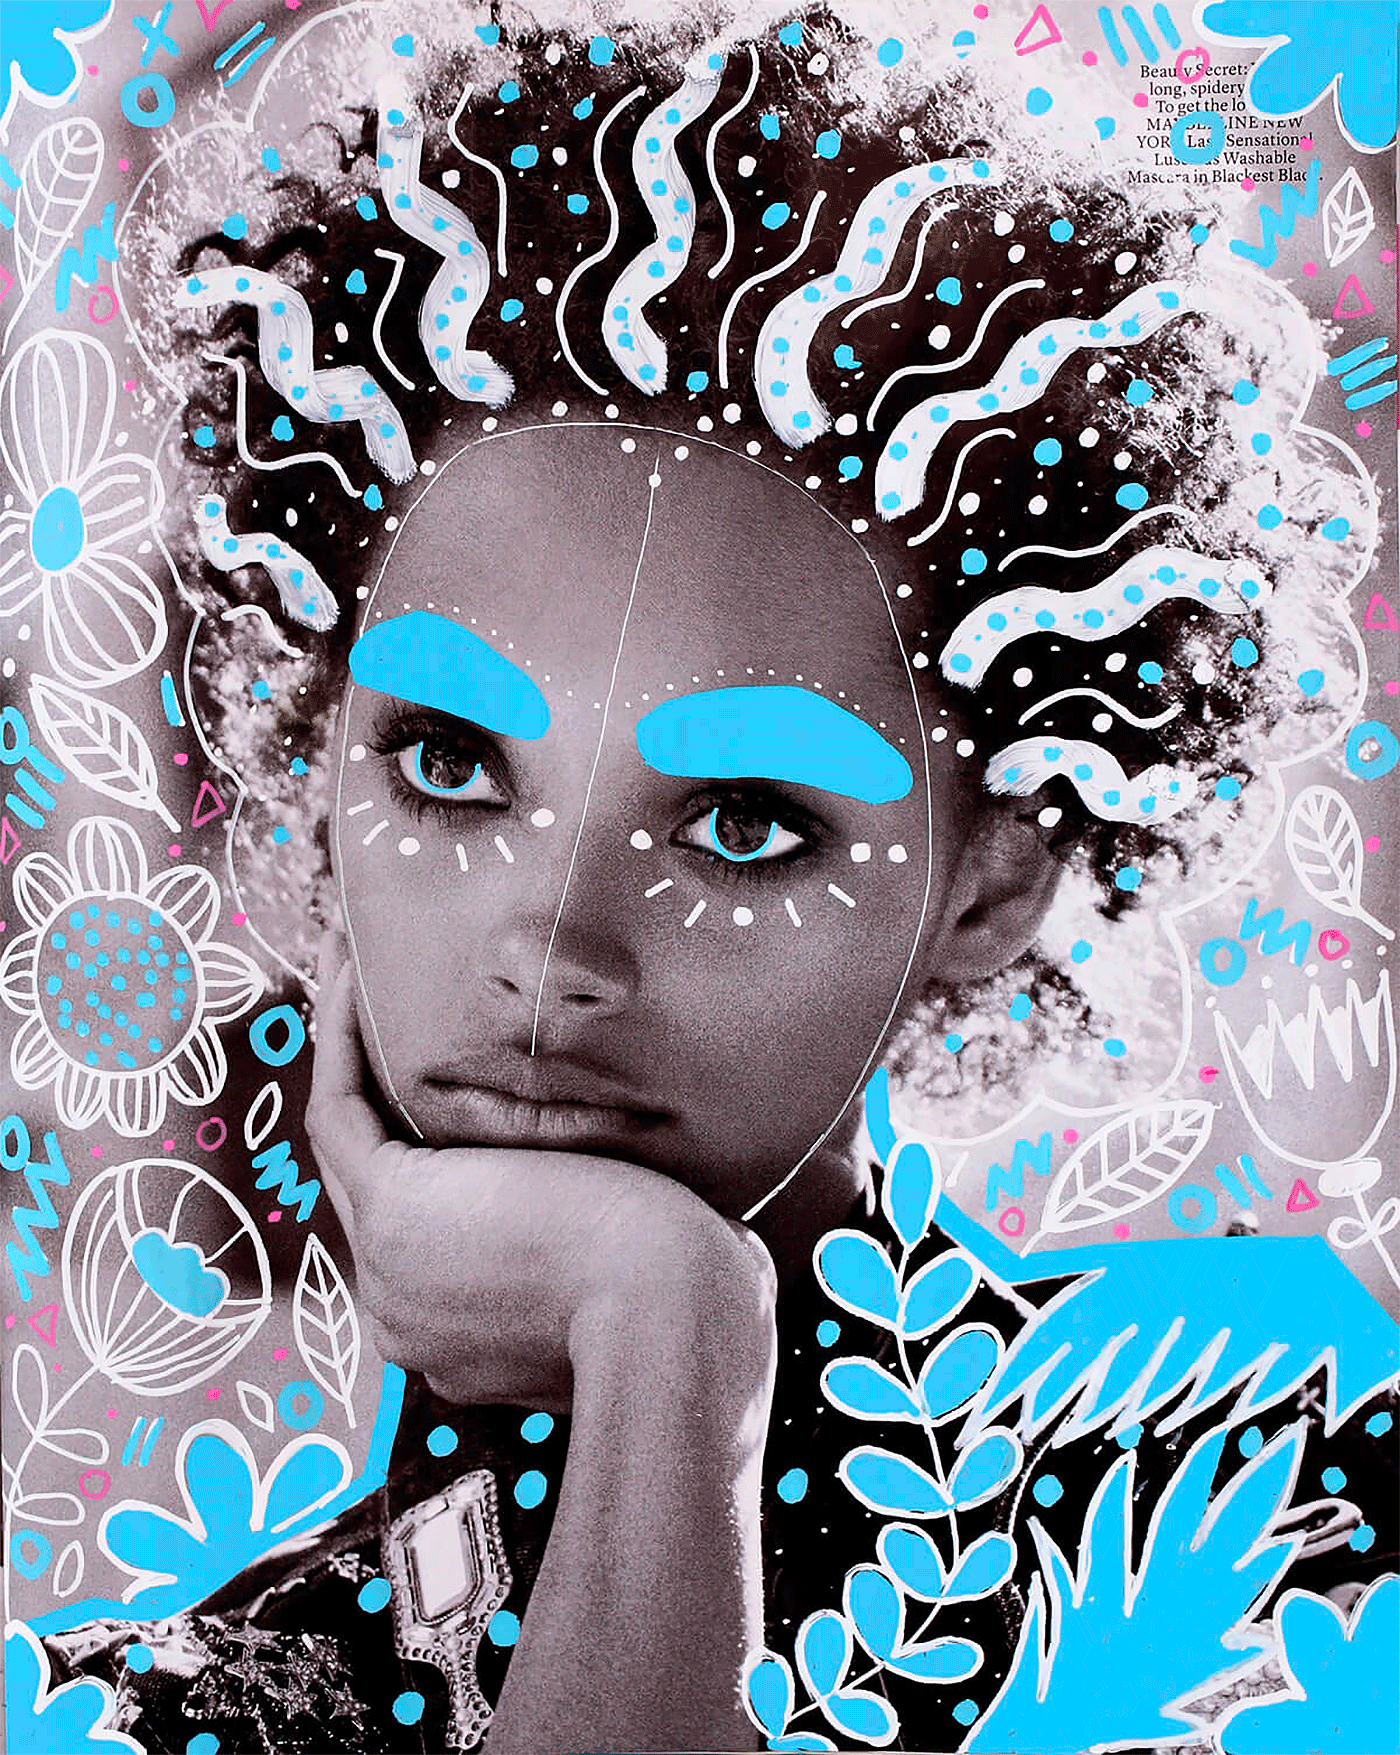 Vibrant Collage Artworks by Andreea Robescu | Inspiration Grid - Vibrant Collage Artworks by Andreea Robescu | Inspiration Grid -   16 beauty Drawings artworks ideas